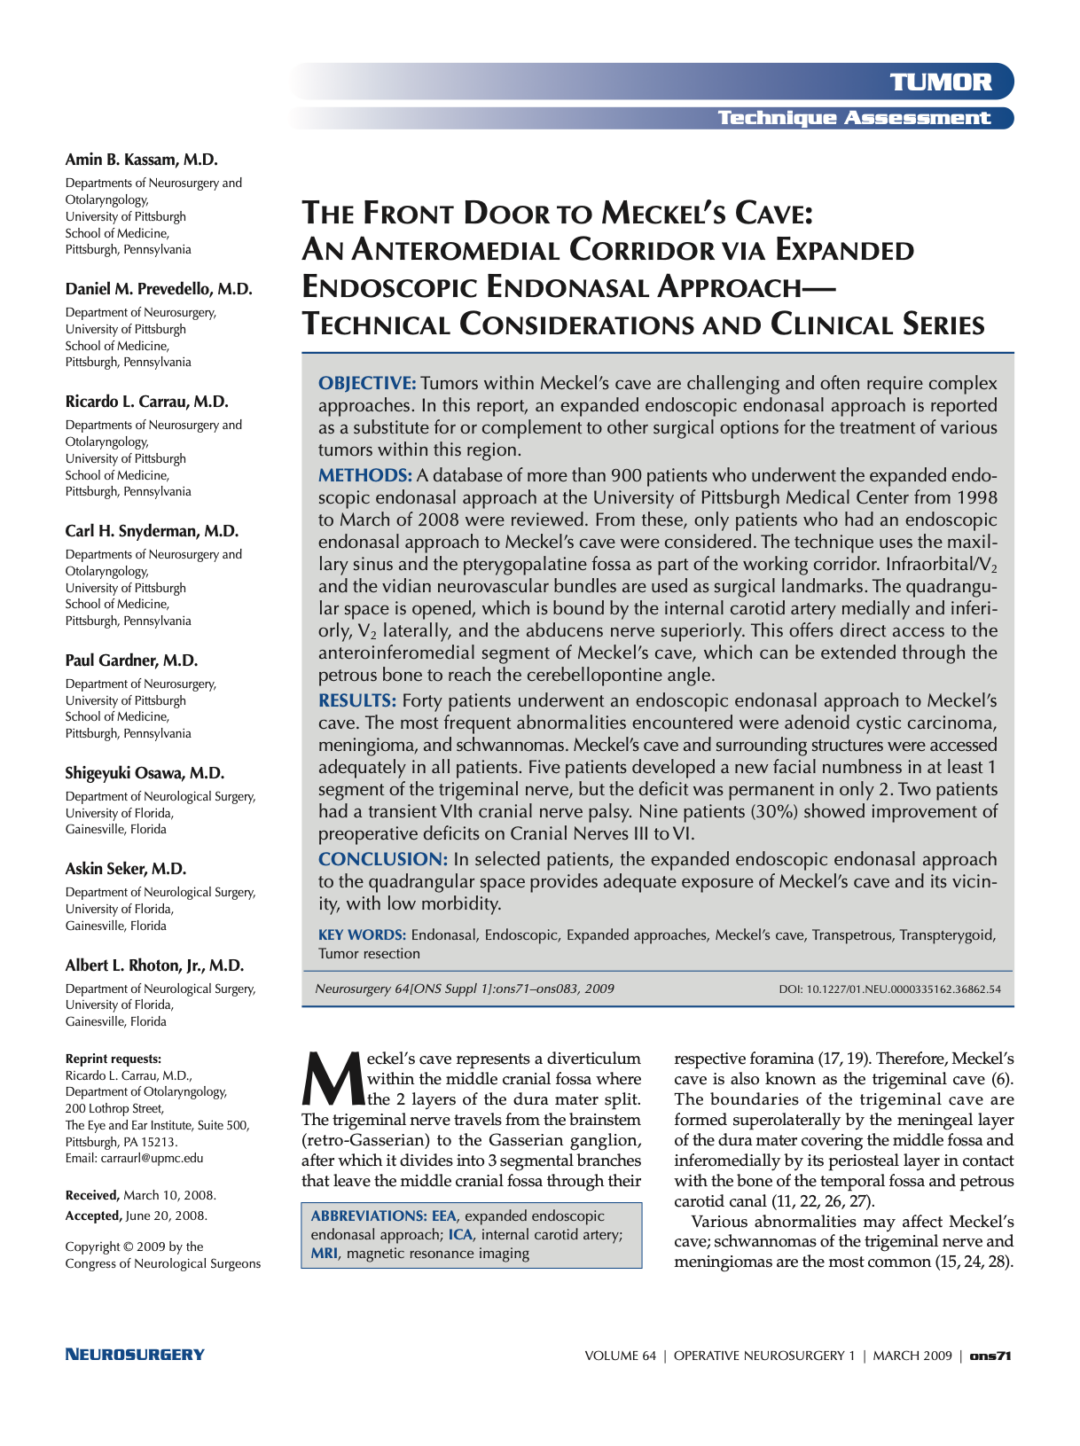 THE FRONT DOOR TO MECKEL’S CAVE AN ANTEROMEDIAL CORRIDOR VIA EXPANDED ENDOSCOPIC ENDONASAL APPROACH— TECHNICAL CONSIDERATIONS AND CLINICAL SERIES